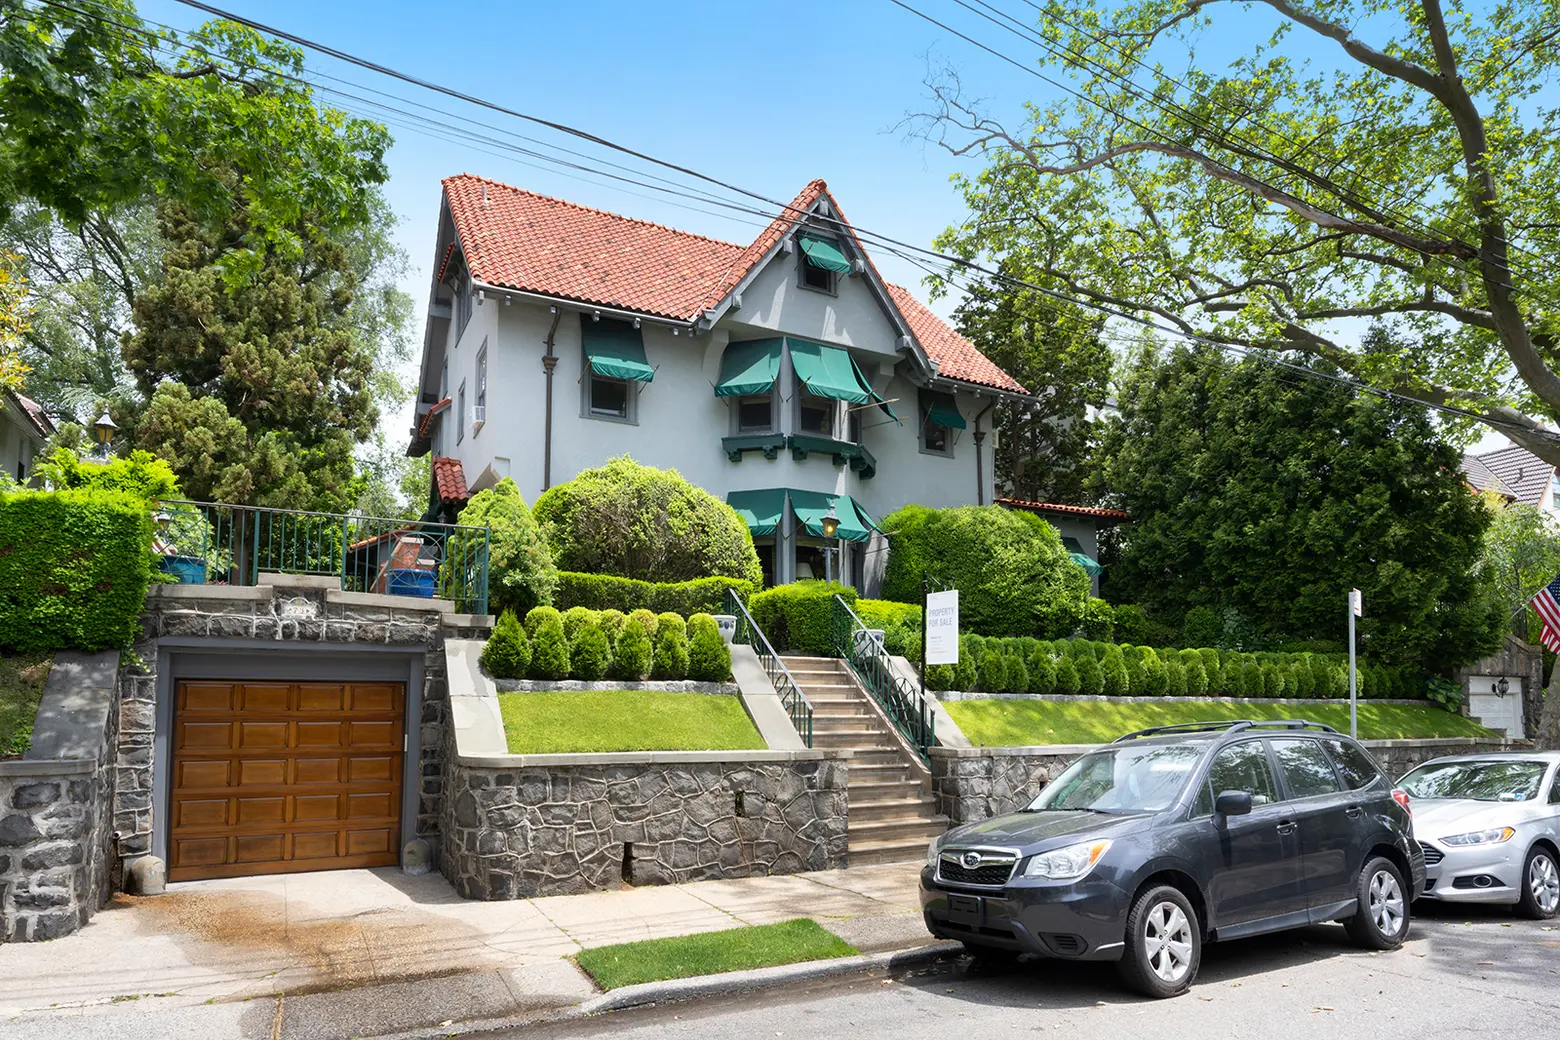 $5.5M Arts & Crafts home in Bay Ridge has modern period interiors and a magical backyard